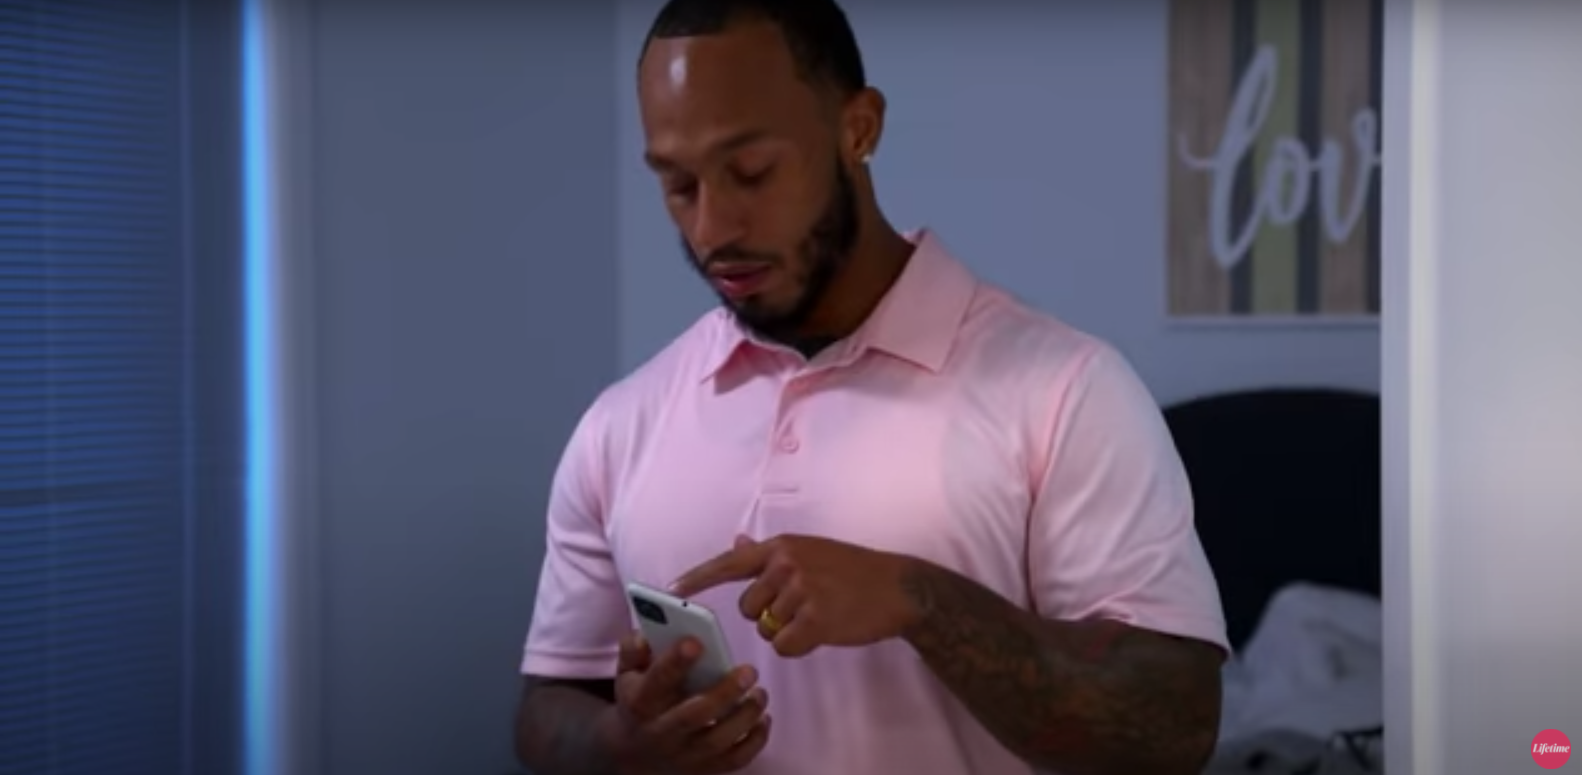 Olajuwon holding a phone and wearing a pink polo in 'Married at First Sight'